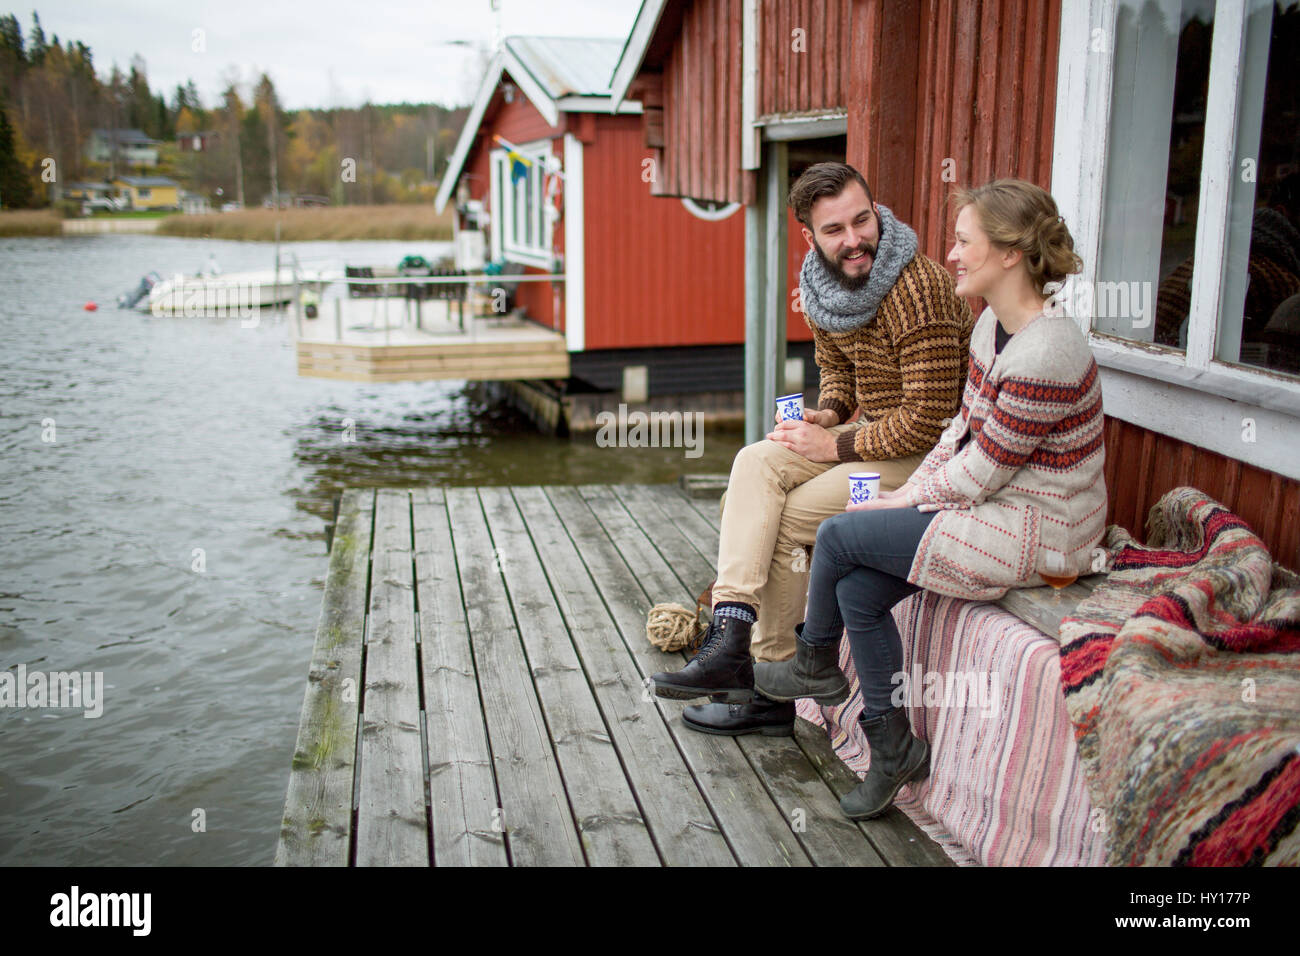 Sweden, Young couple sitting on bench Stock Photo